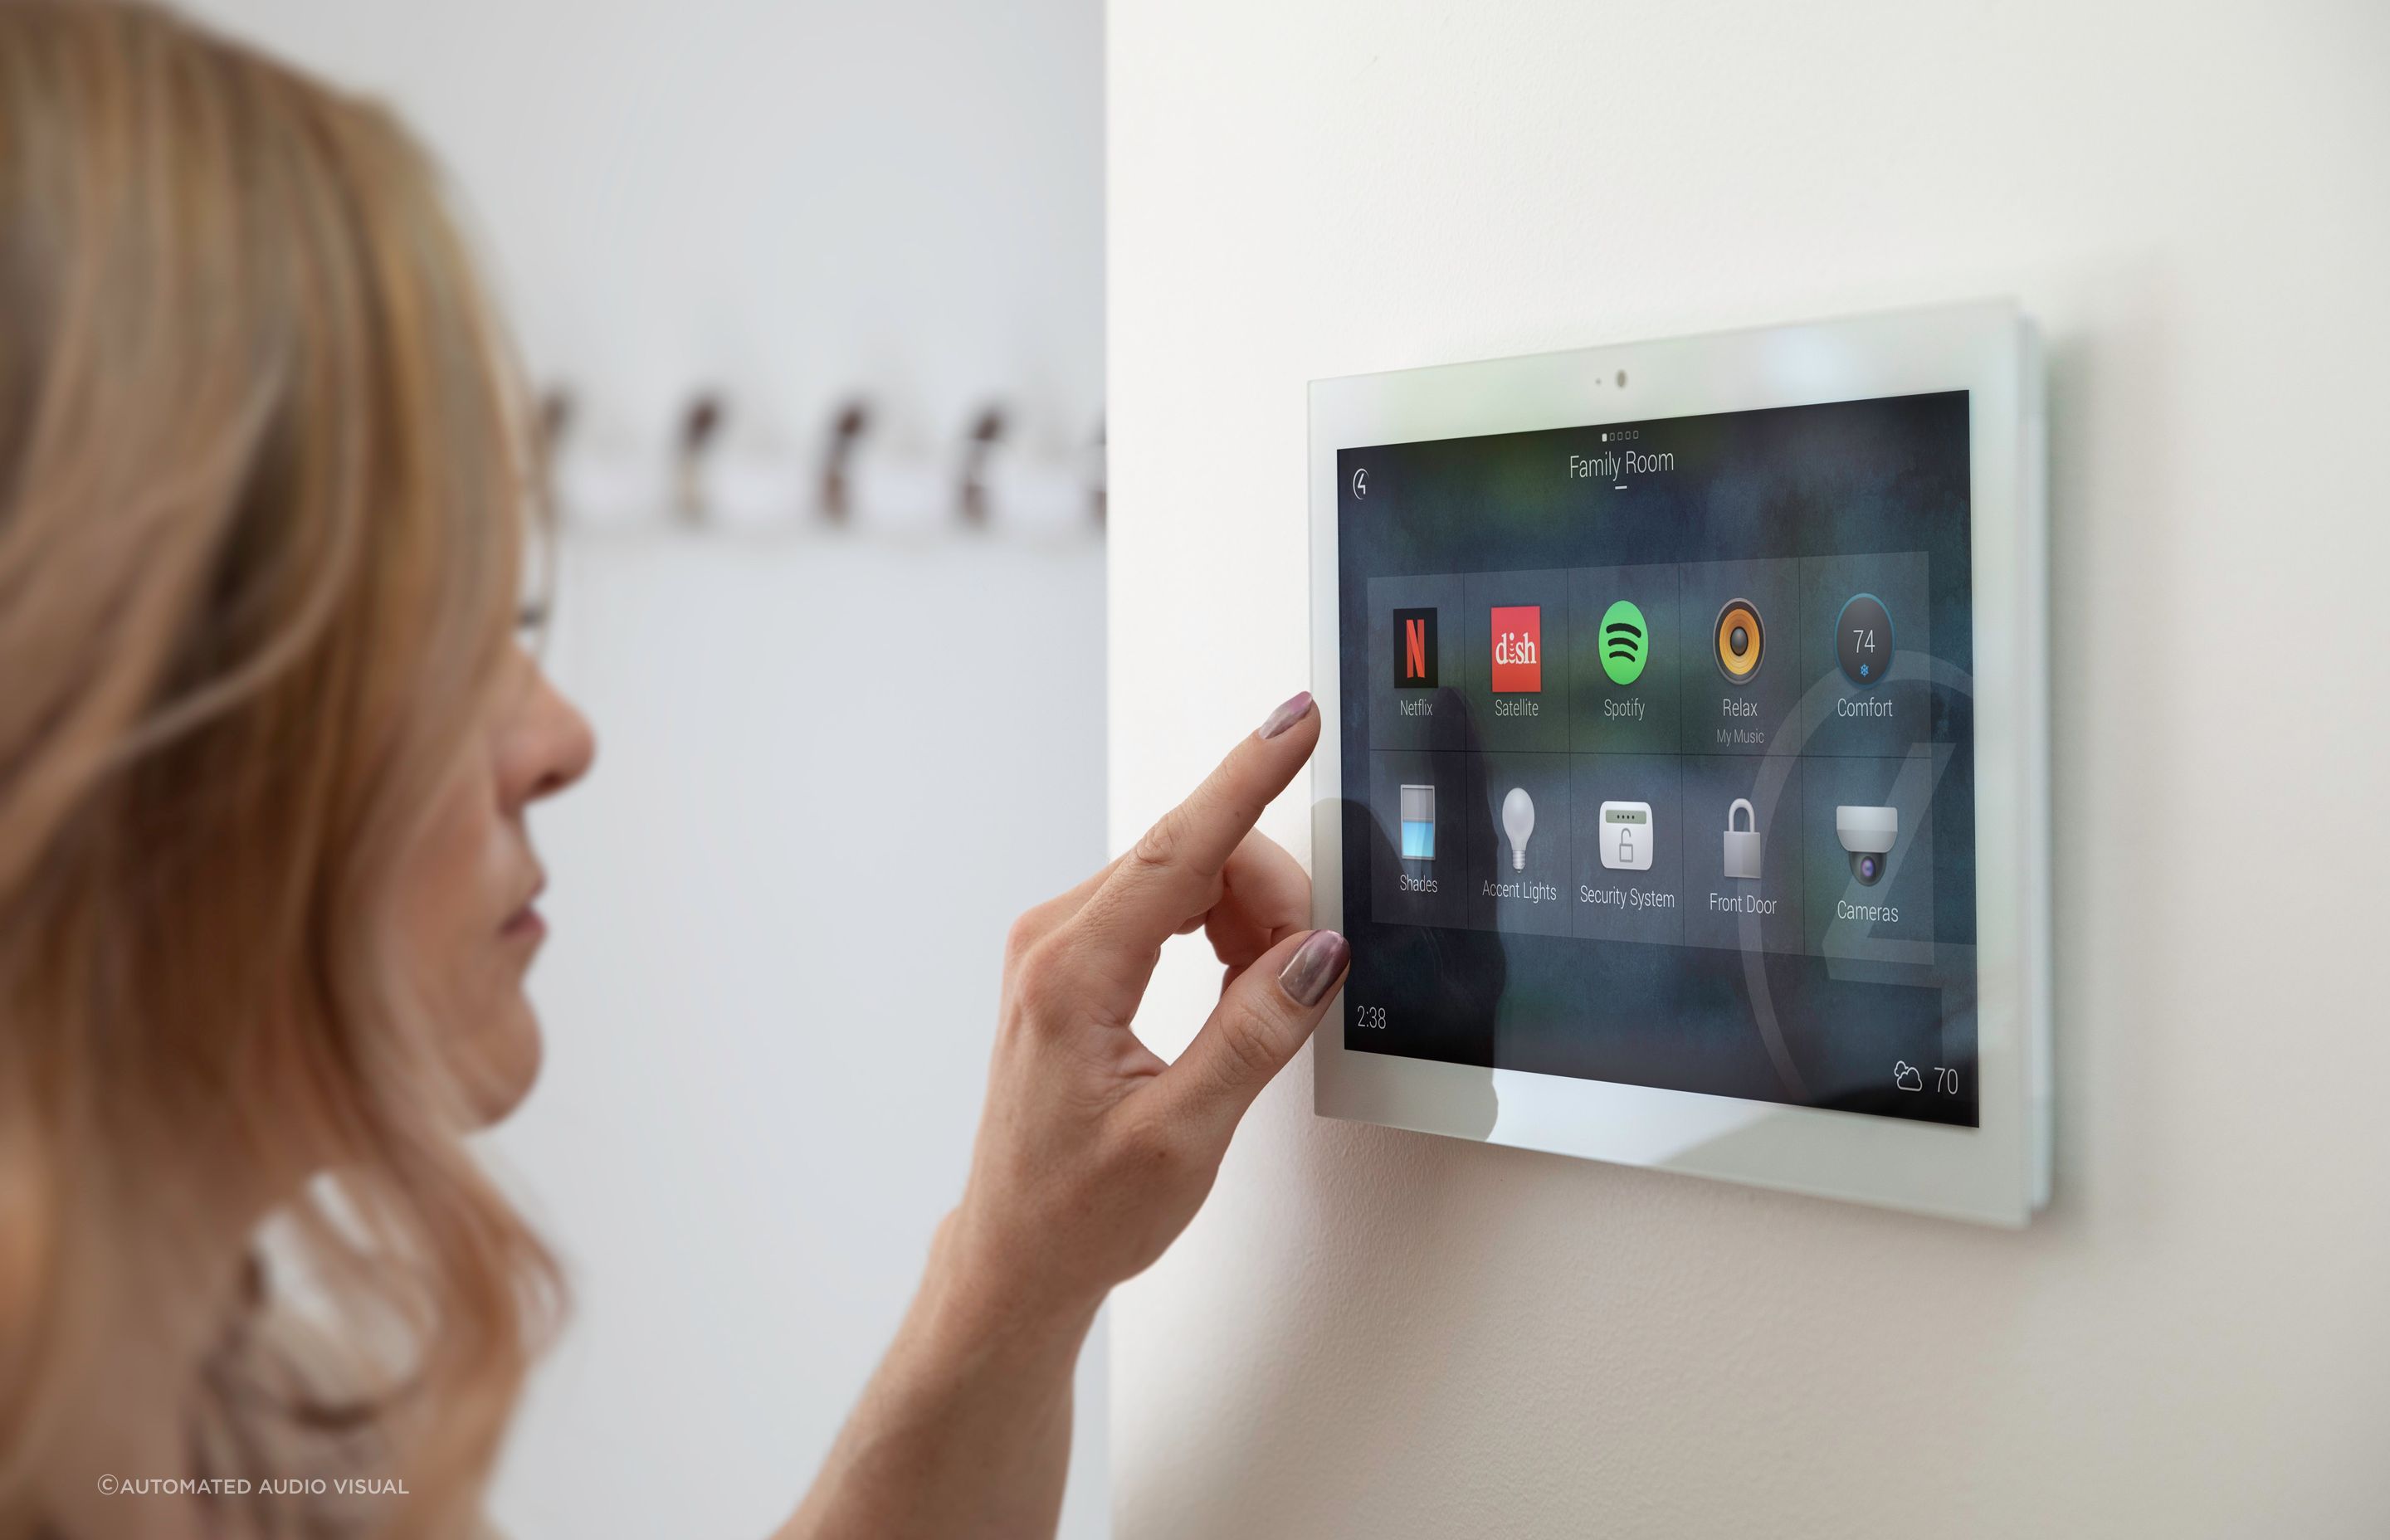 A smart home hub centralises control of various smart devices, allowing you to manage settings and automation for multiple devices from one place.